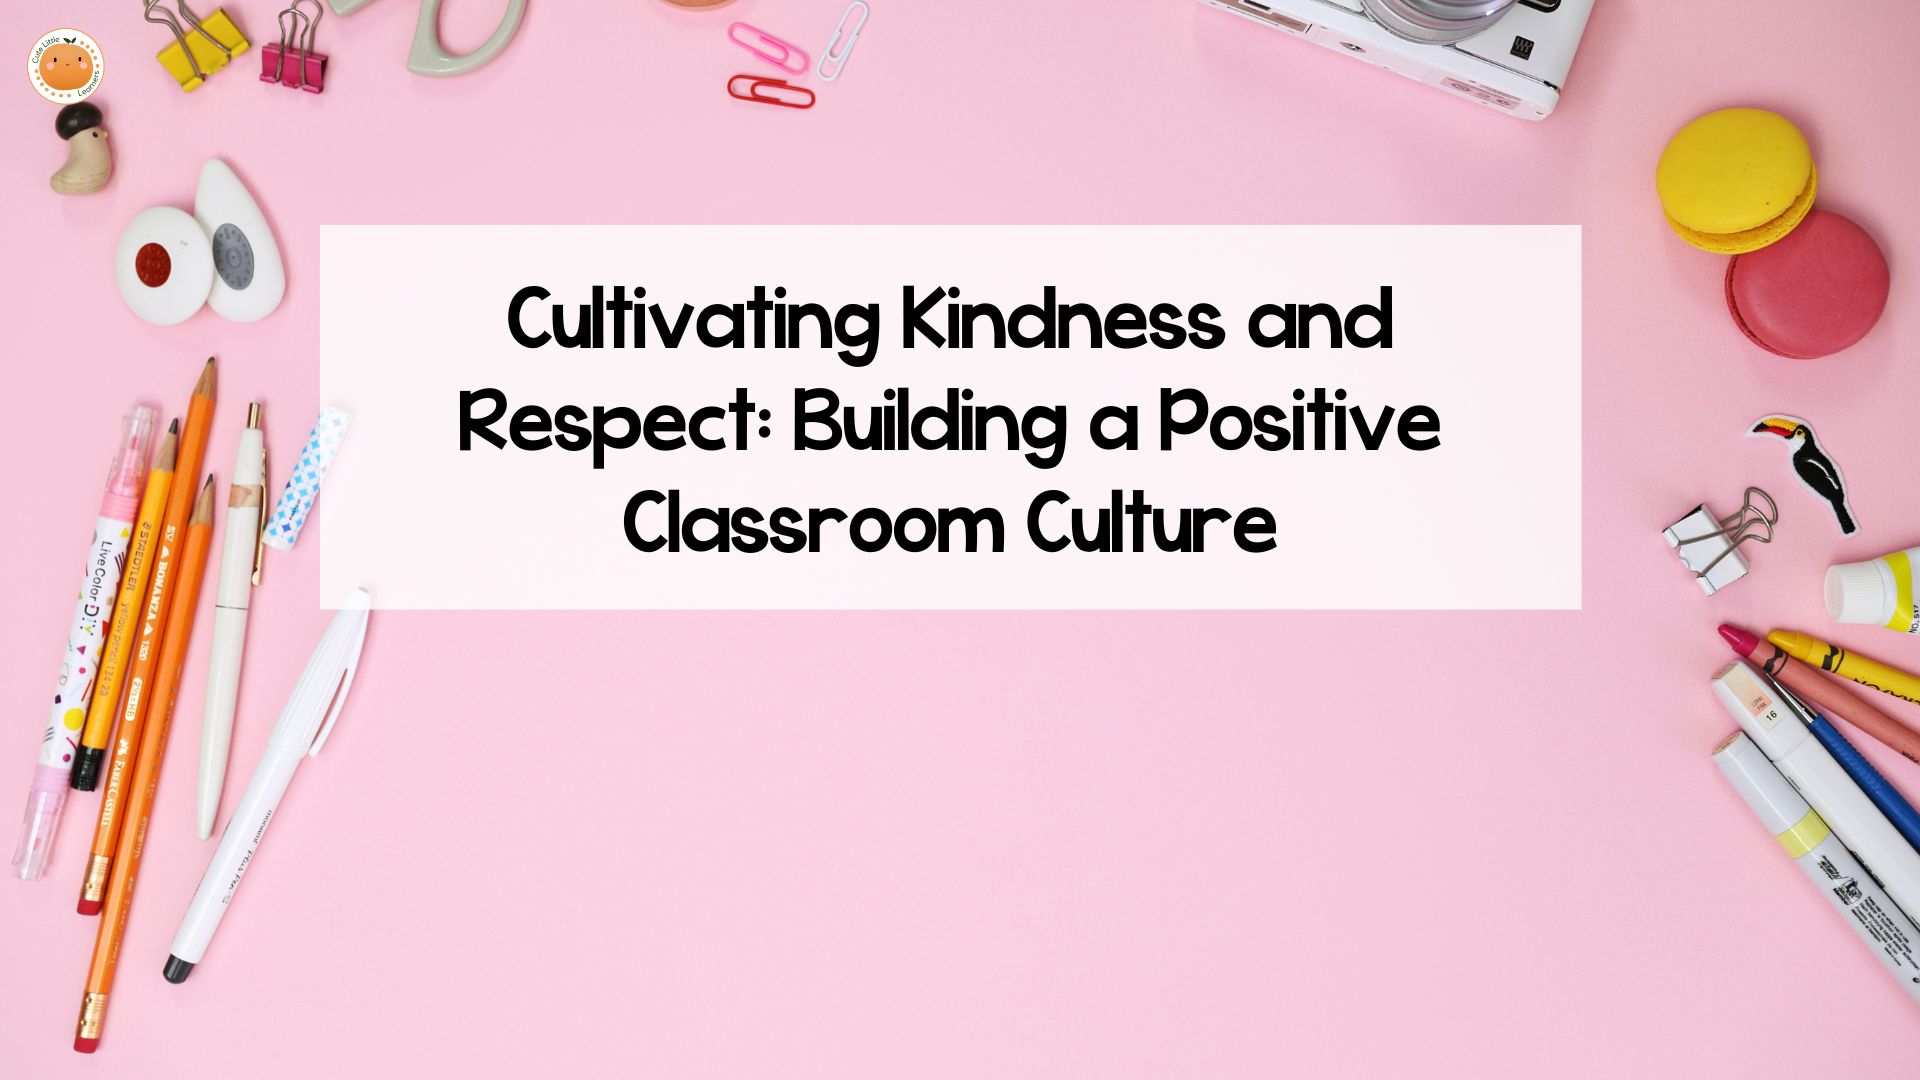 Cultivating Kindness and Respect: Building a Positive Classroom Culture